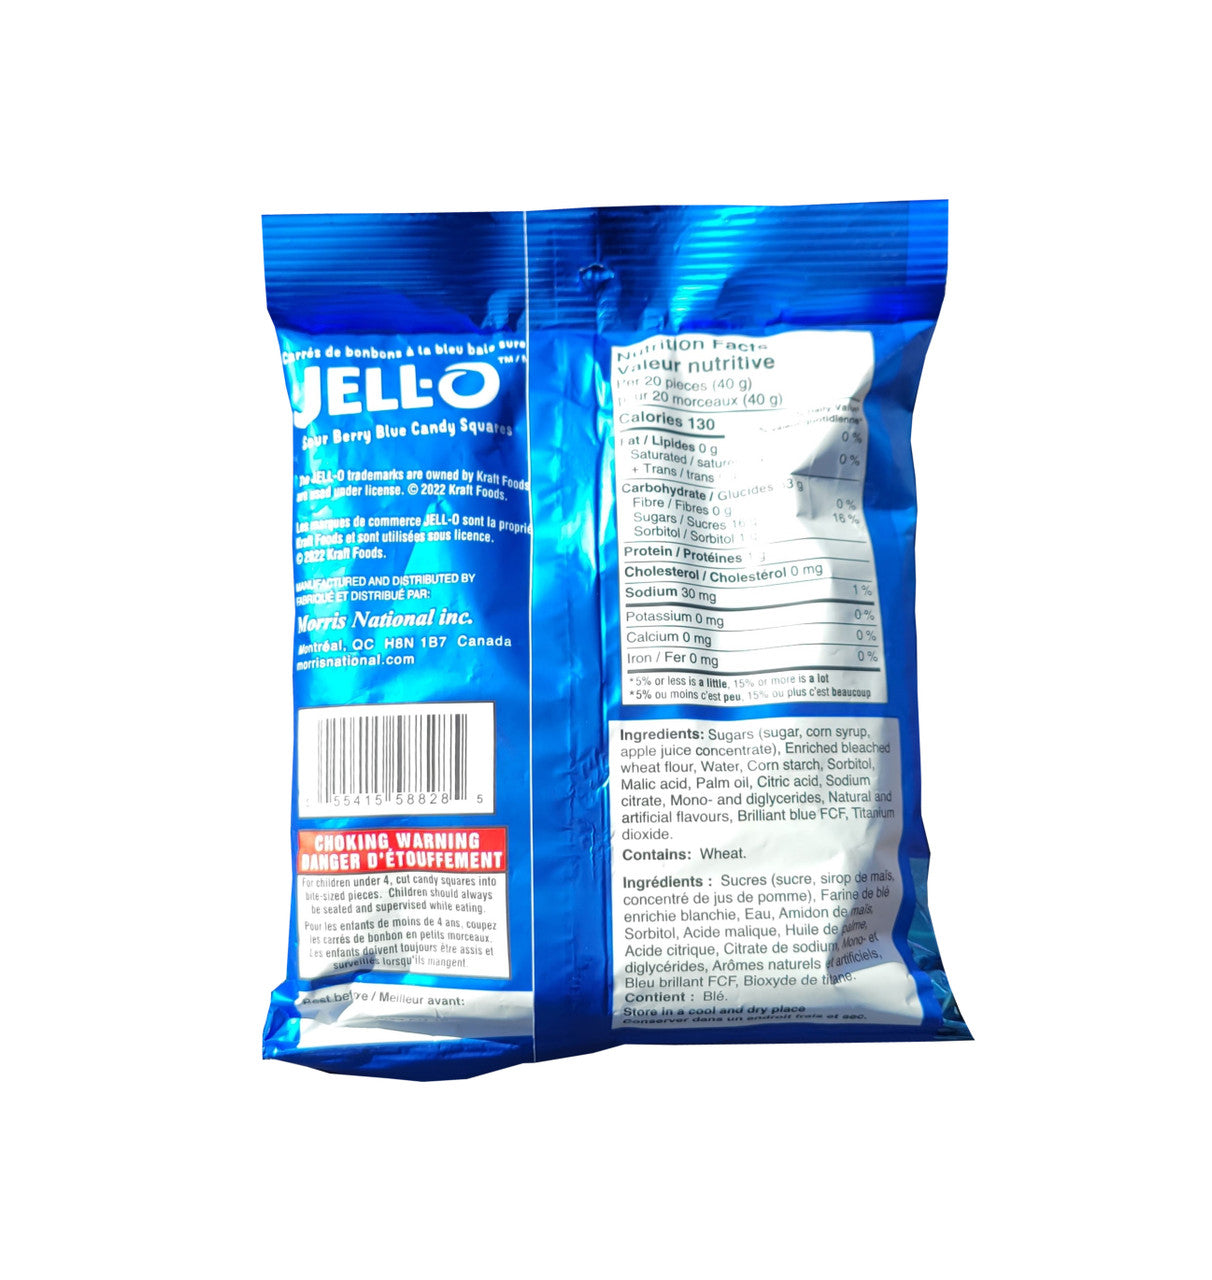 Jell-O Sour Berry Blue Candy Squares, 127g/4.5oz. (Imported from Canada)